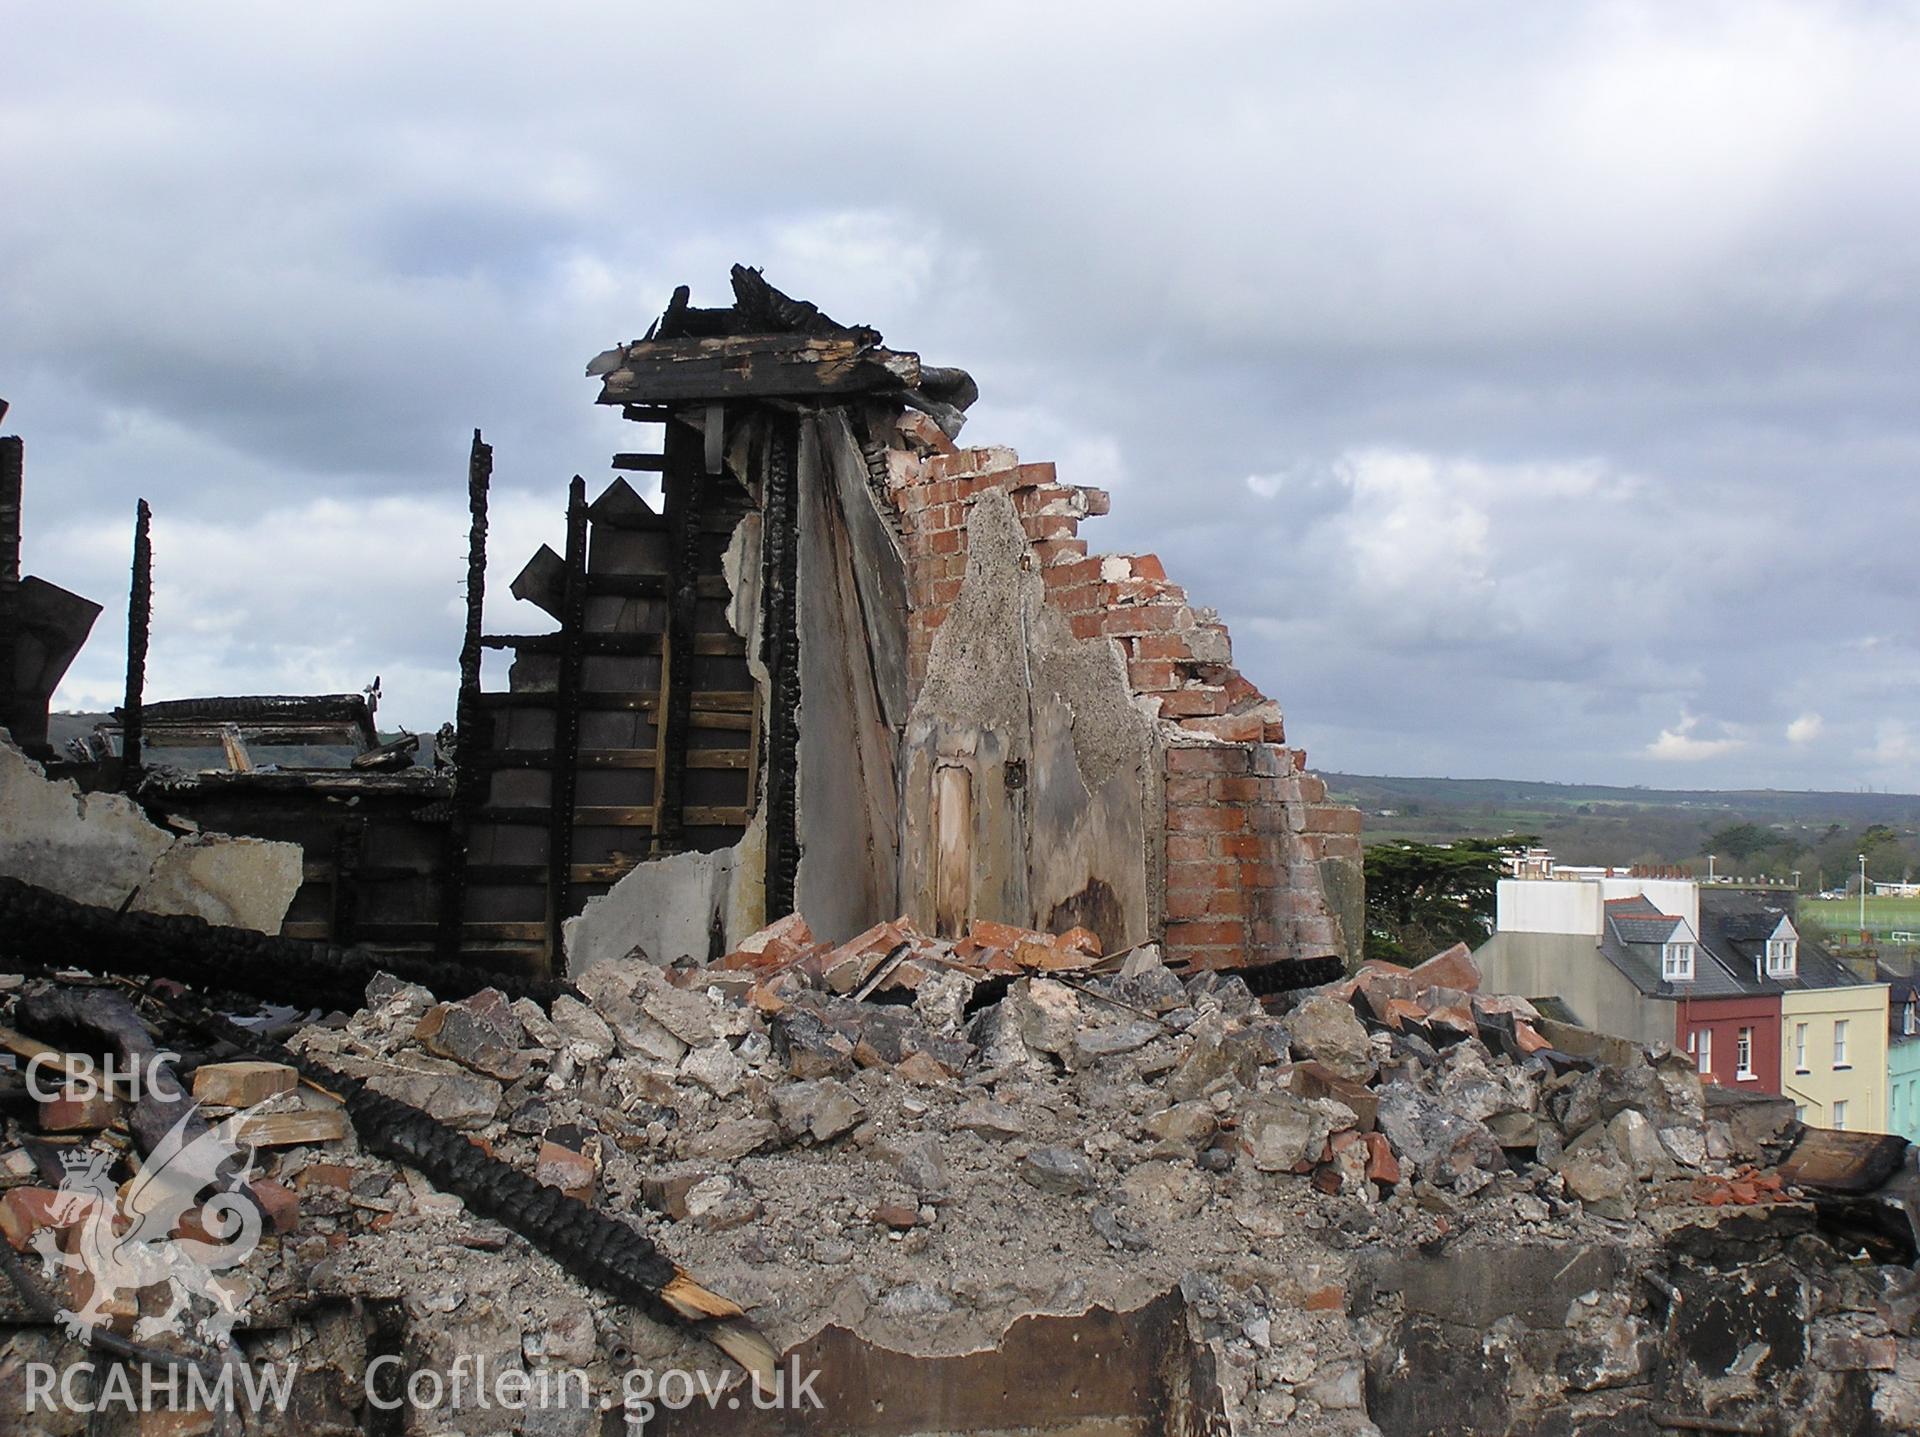 Colour digital photograph showing the wreckage of the Royal Gatehouse Hotel.